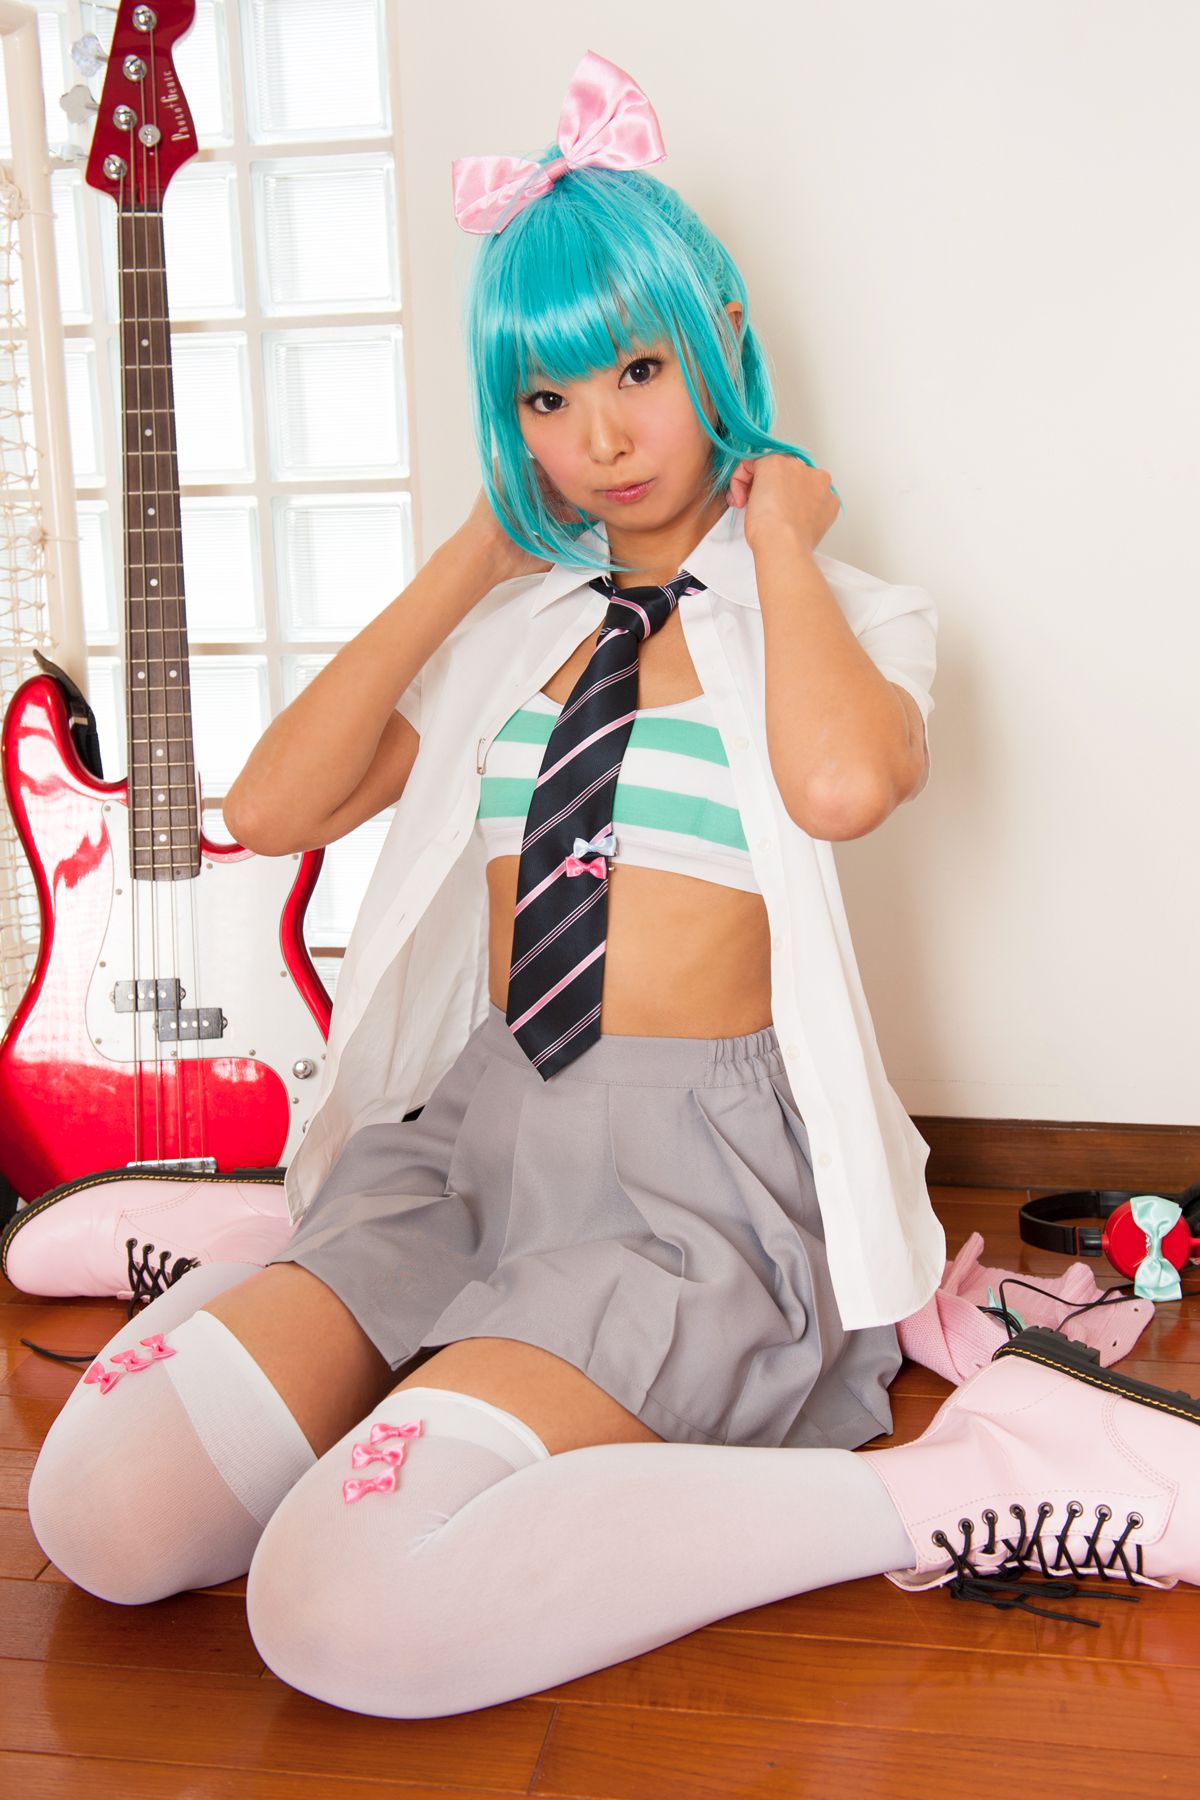 taotuhome[Cosplay] Necoco as Hatsune Miku from Vocaloid 套图第140张